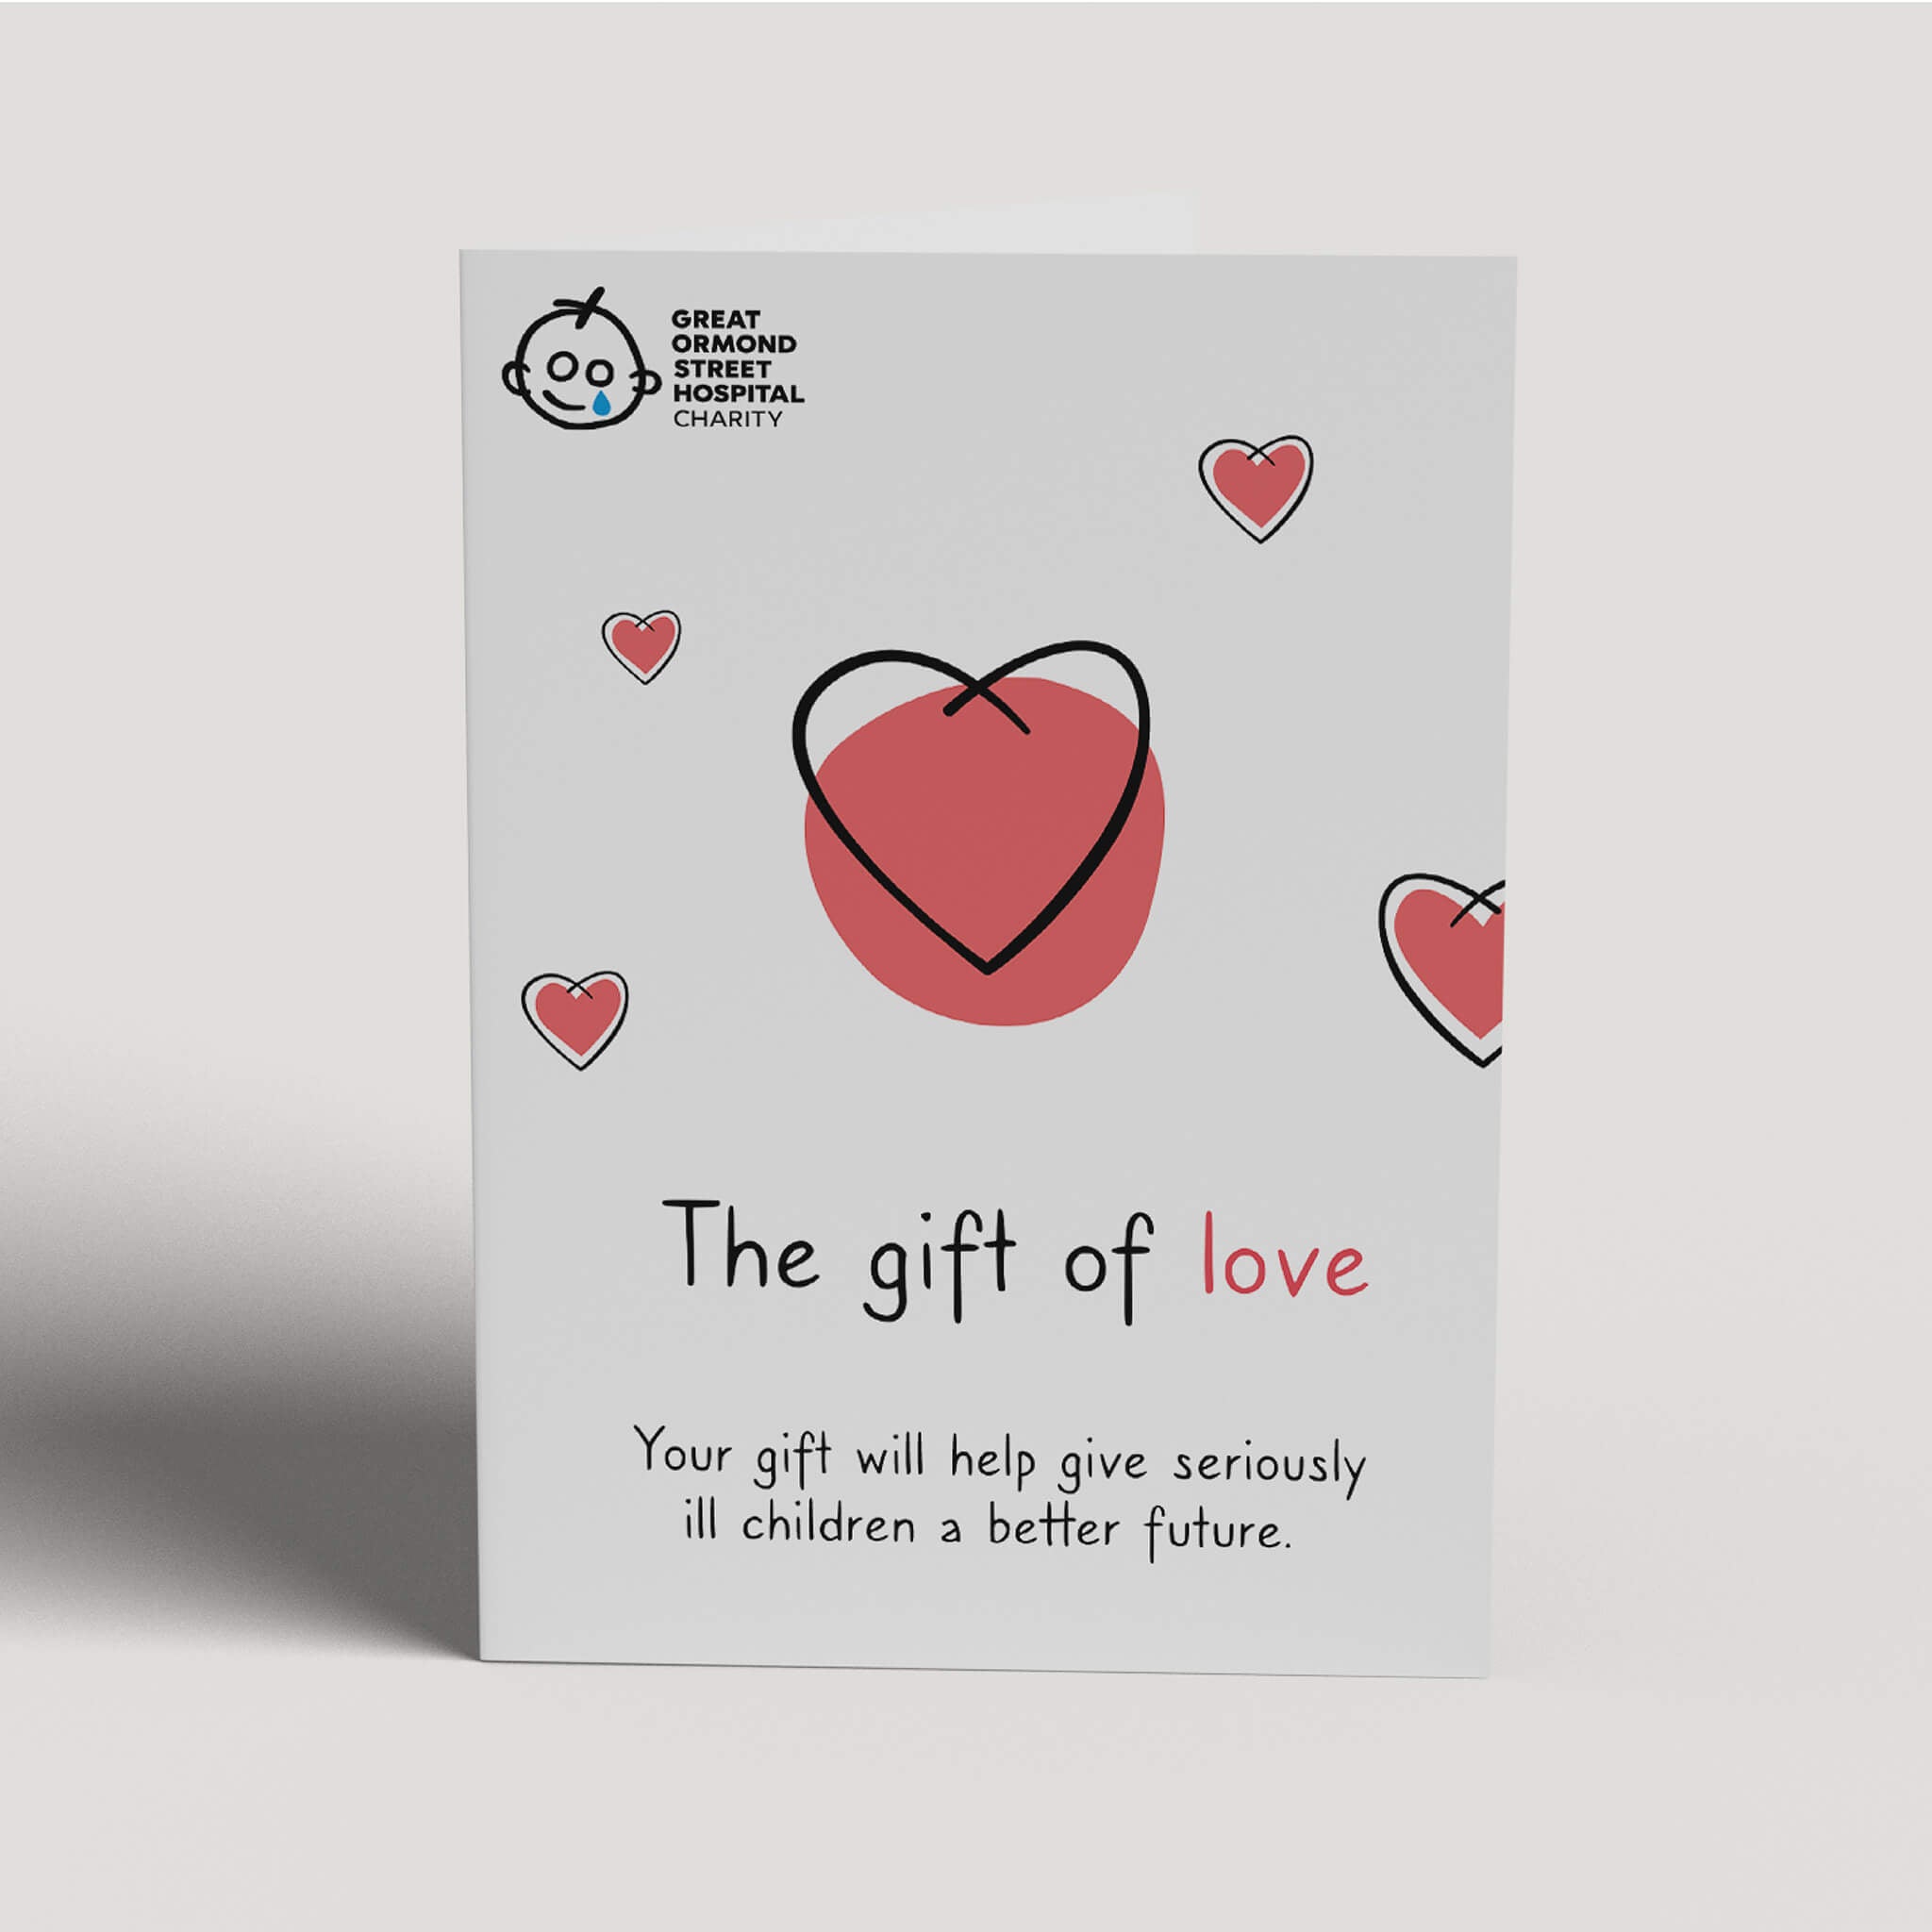 GOSH_Charity_alternative_gift_card_for_parent_acommodation_donations